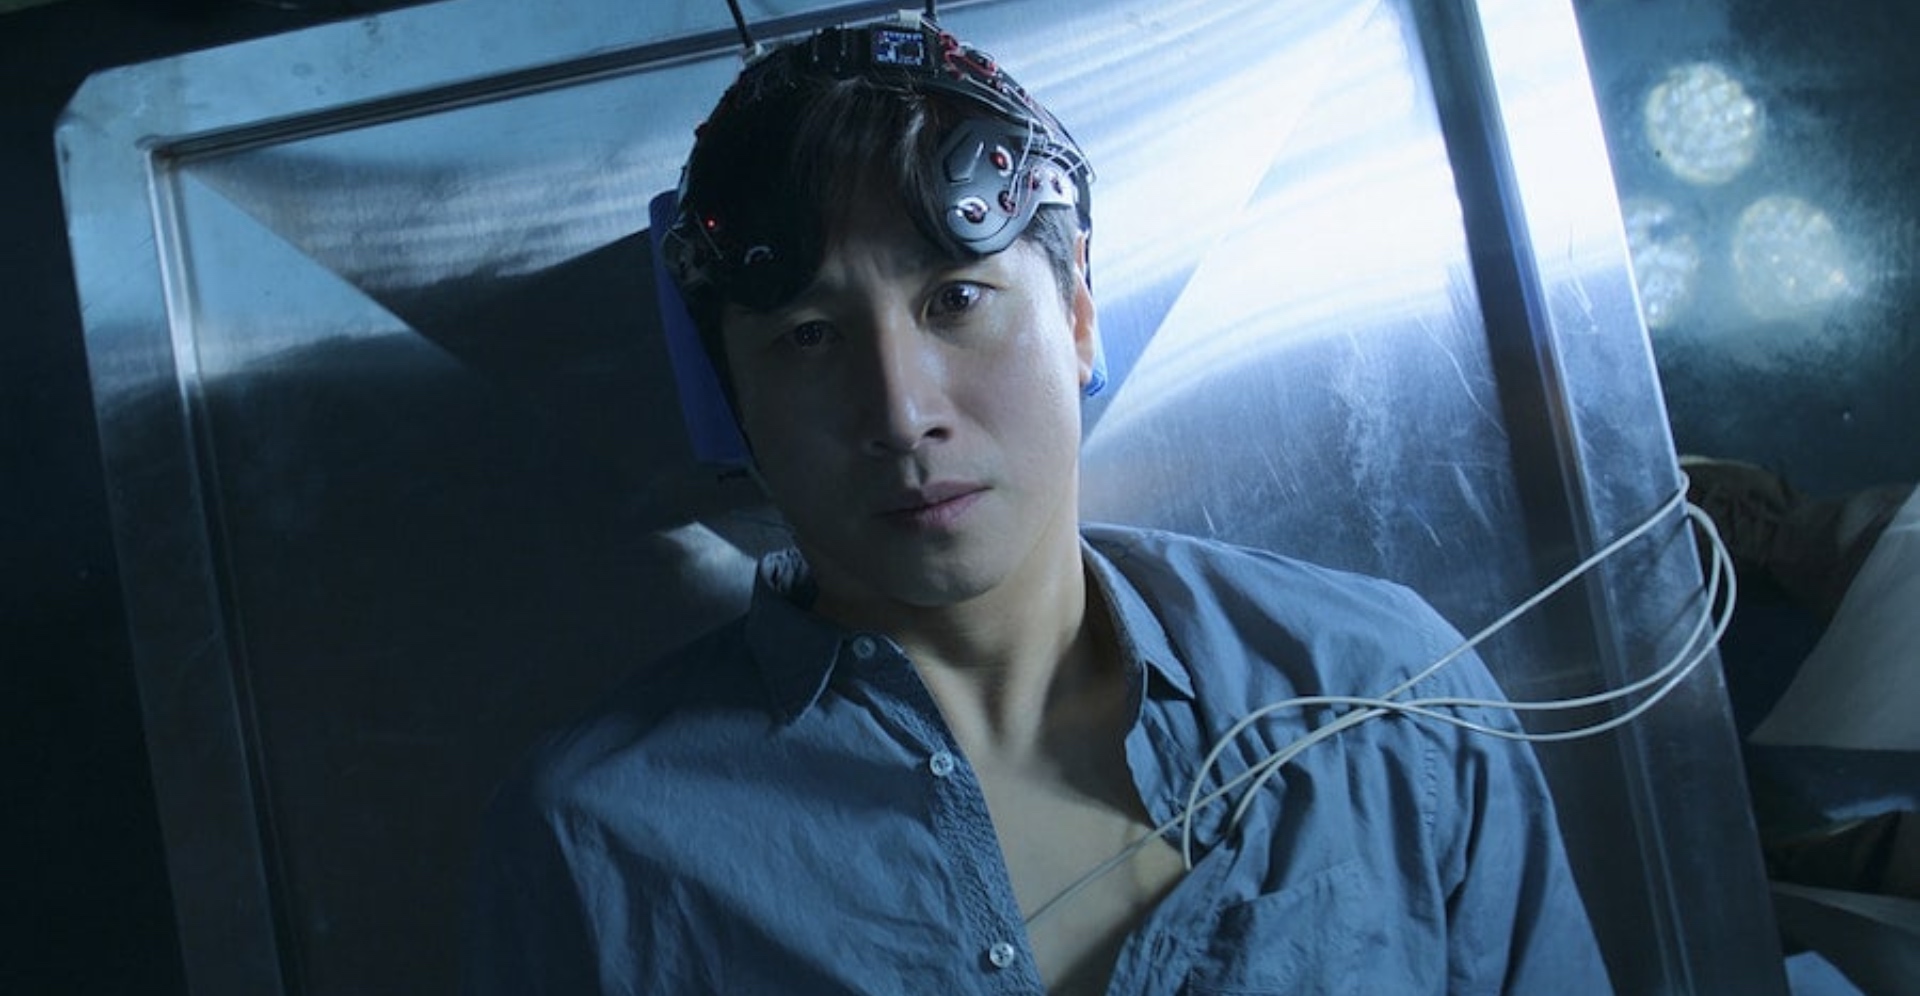 ‘Dr. Brain’: Episode 1 Complete Synopsis and Breakdown